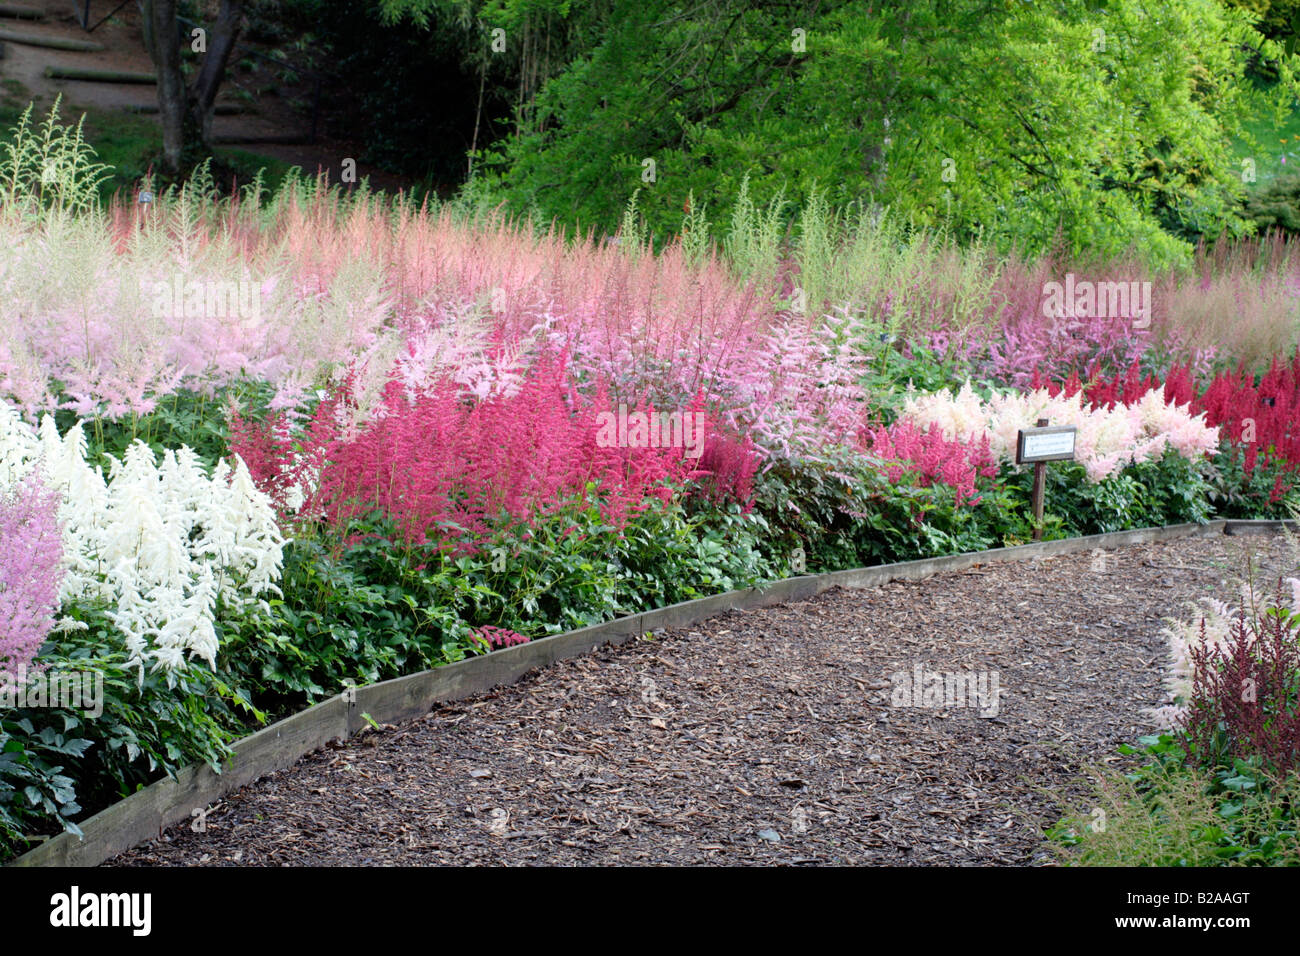 NATIONAL COLLECTION OF ASTILBE AT MARWOOD HILL GARDENS NORTH DEVON Stock Photo